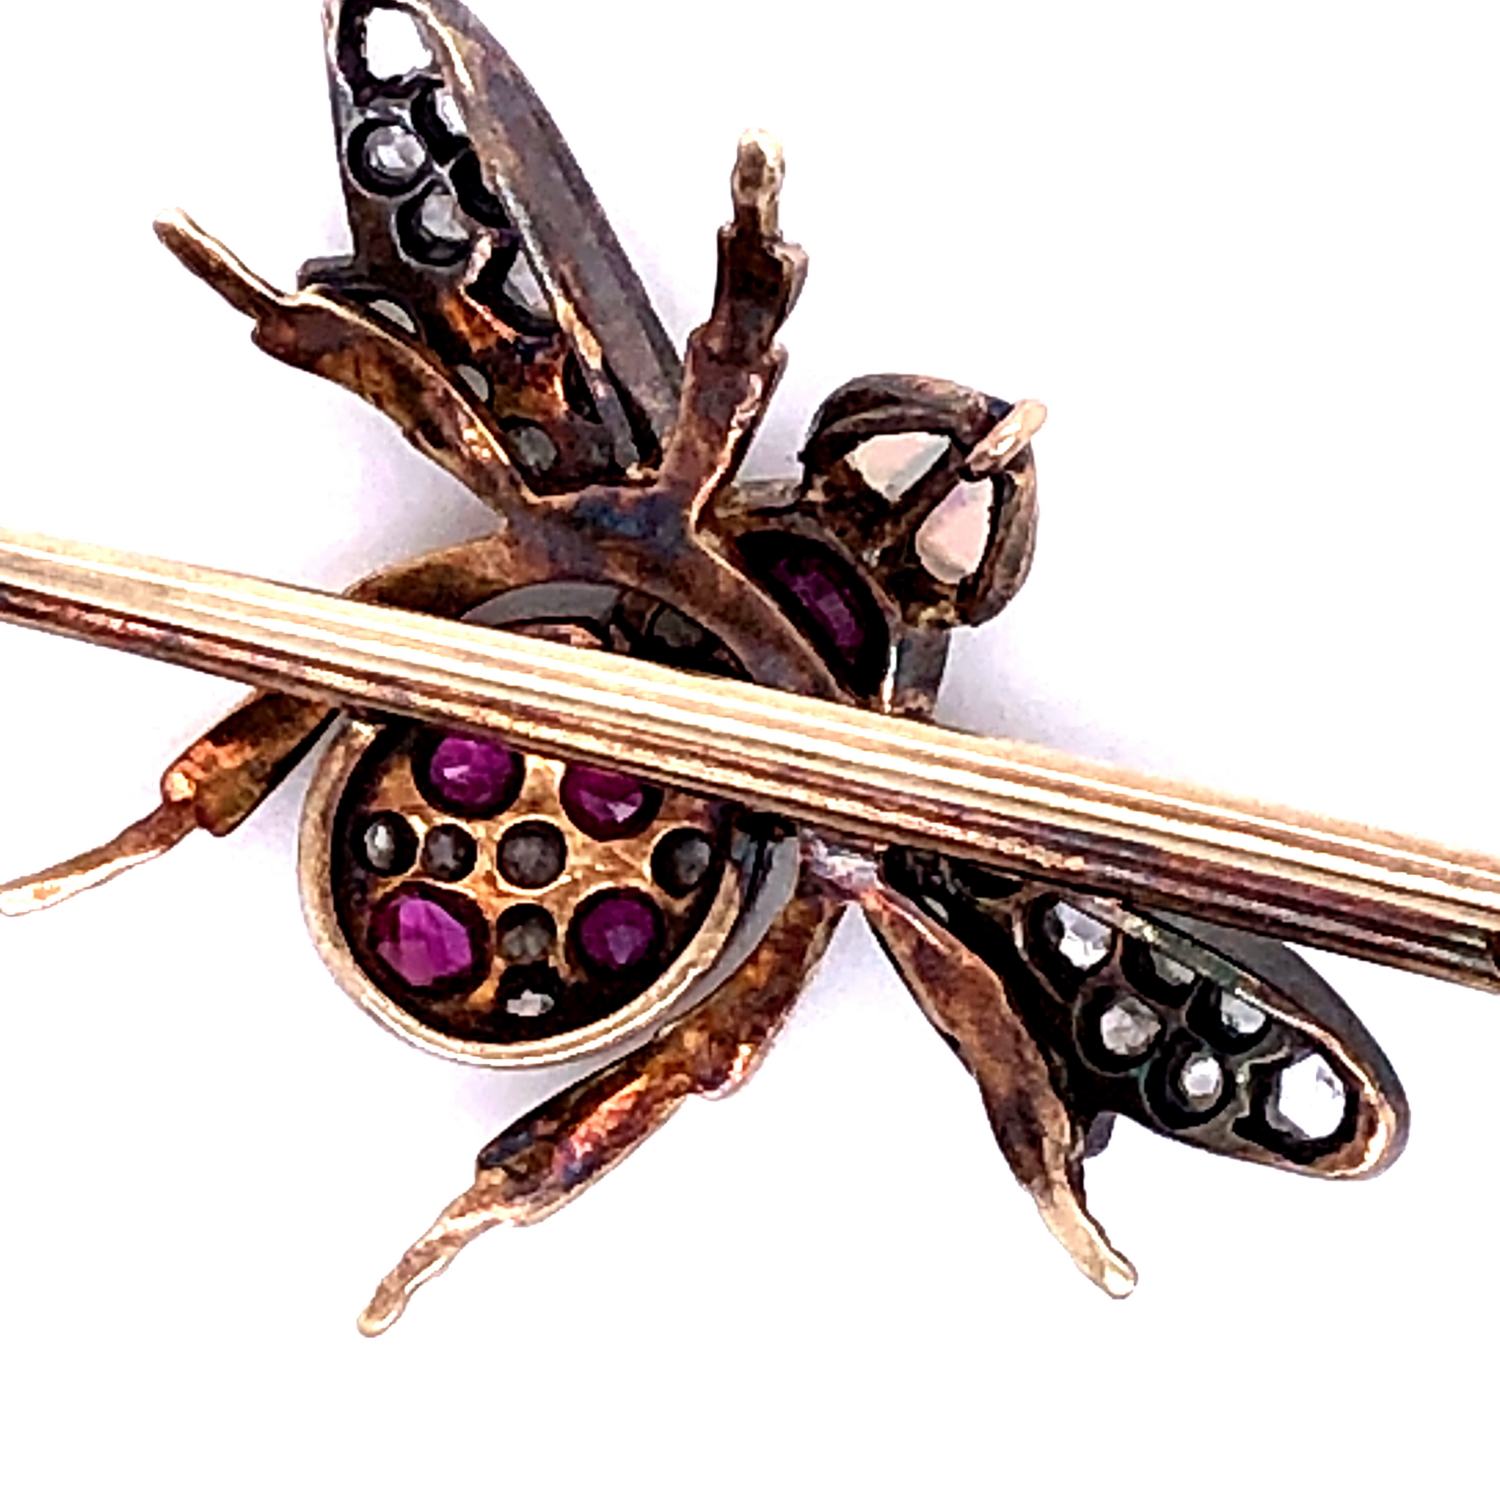 AN ANTIQUE GOLD AND GEMSET BEE BROOCH. THE BODY OF THE BEE IS SET WITH OLD CUT RUBIES AND DIAMONDS - Image 8 of 13